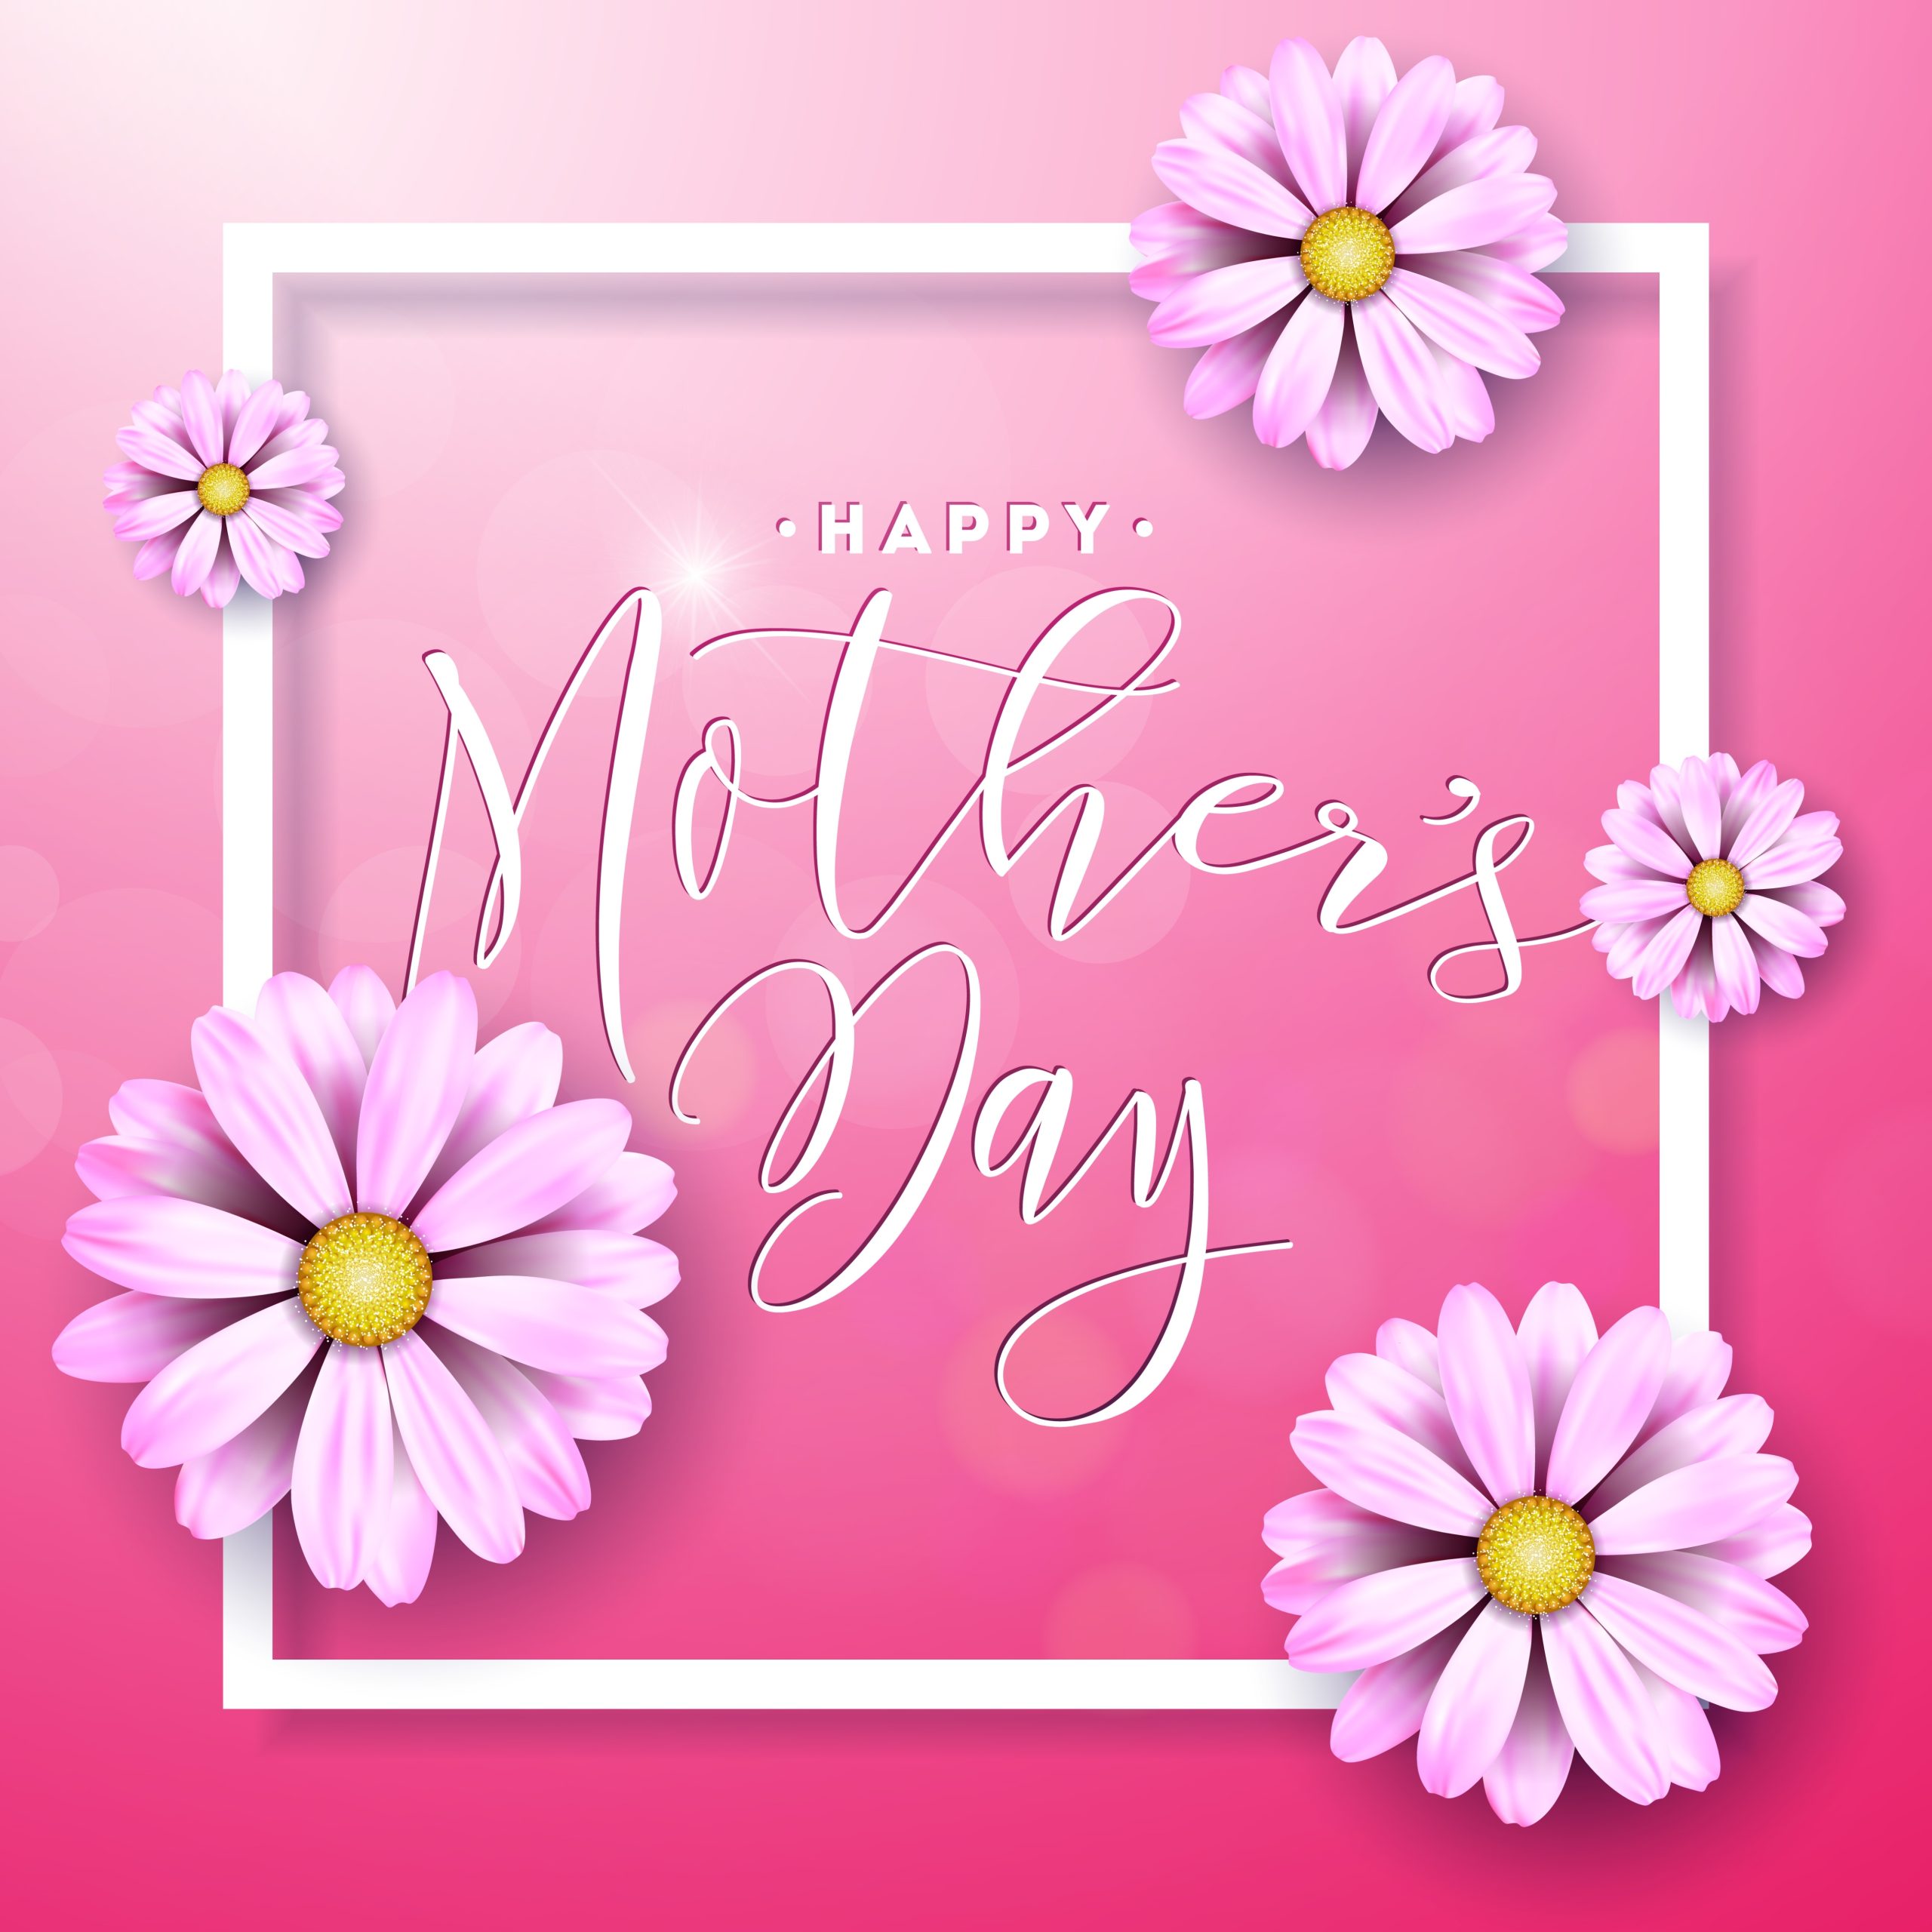 Happy Mothers Day Greeting Card With Flower On Pink Background. Vector Throughout Mothers Day Card Templates